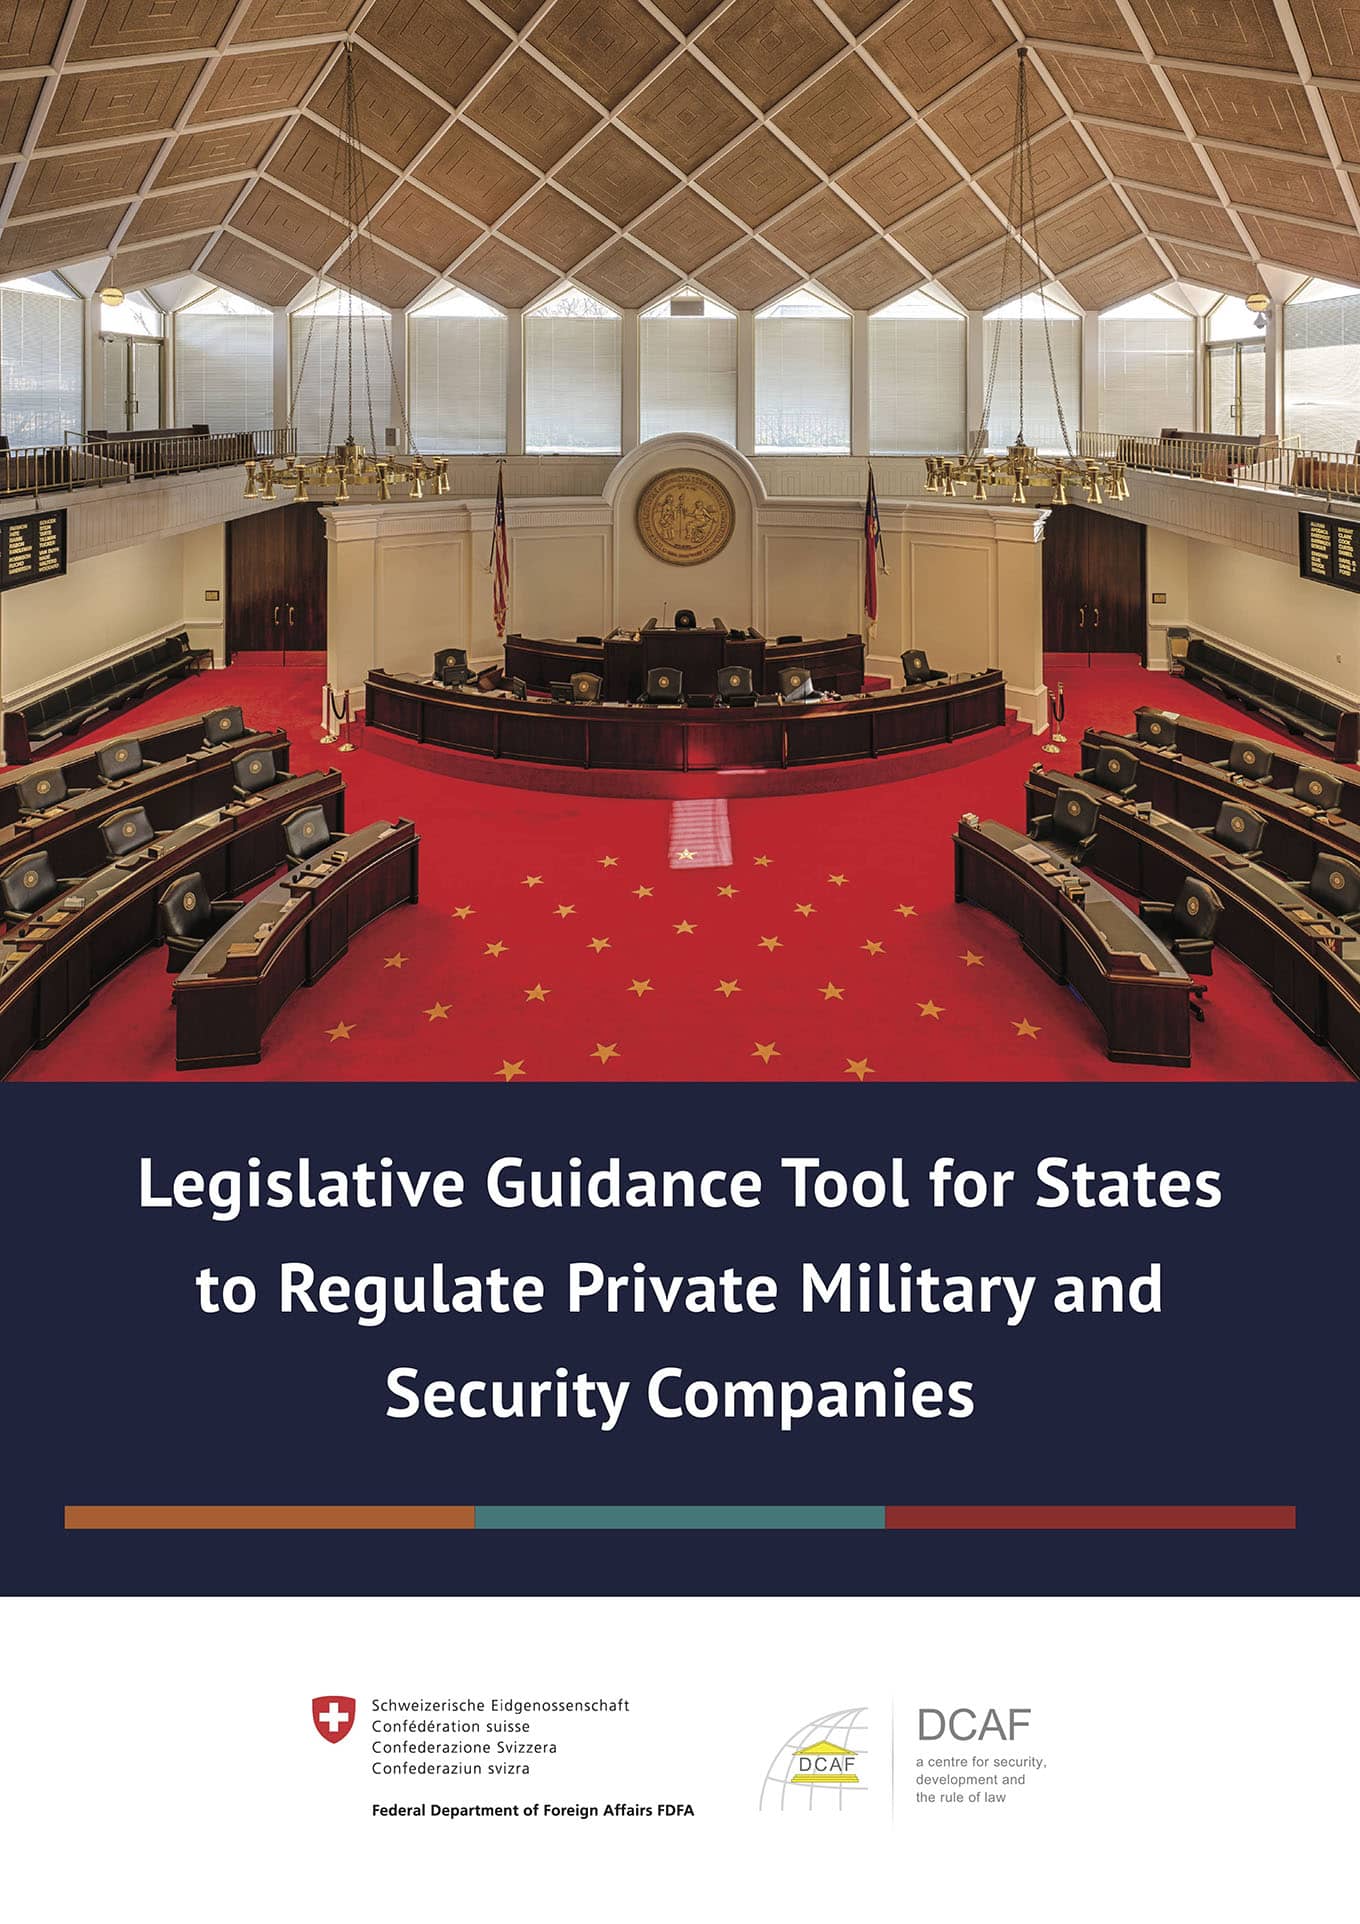 Legislative Guidance Tool for States to Regulate Private Military and Security Companies (DCAF, 2016)